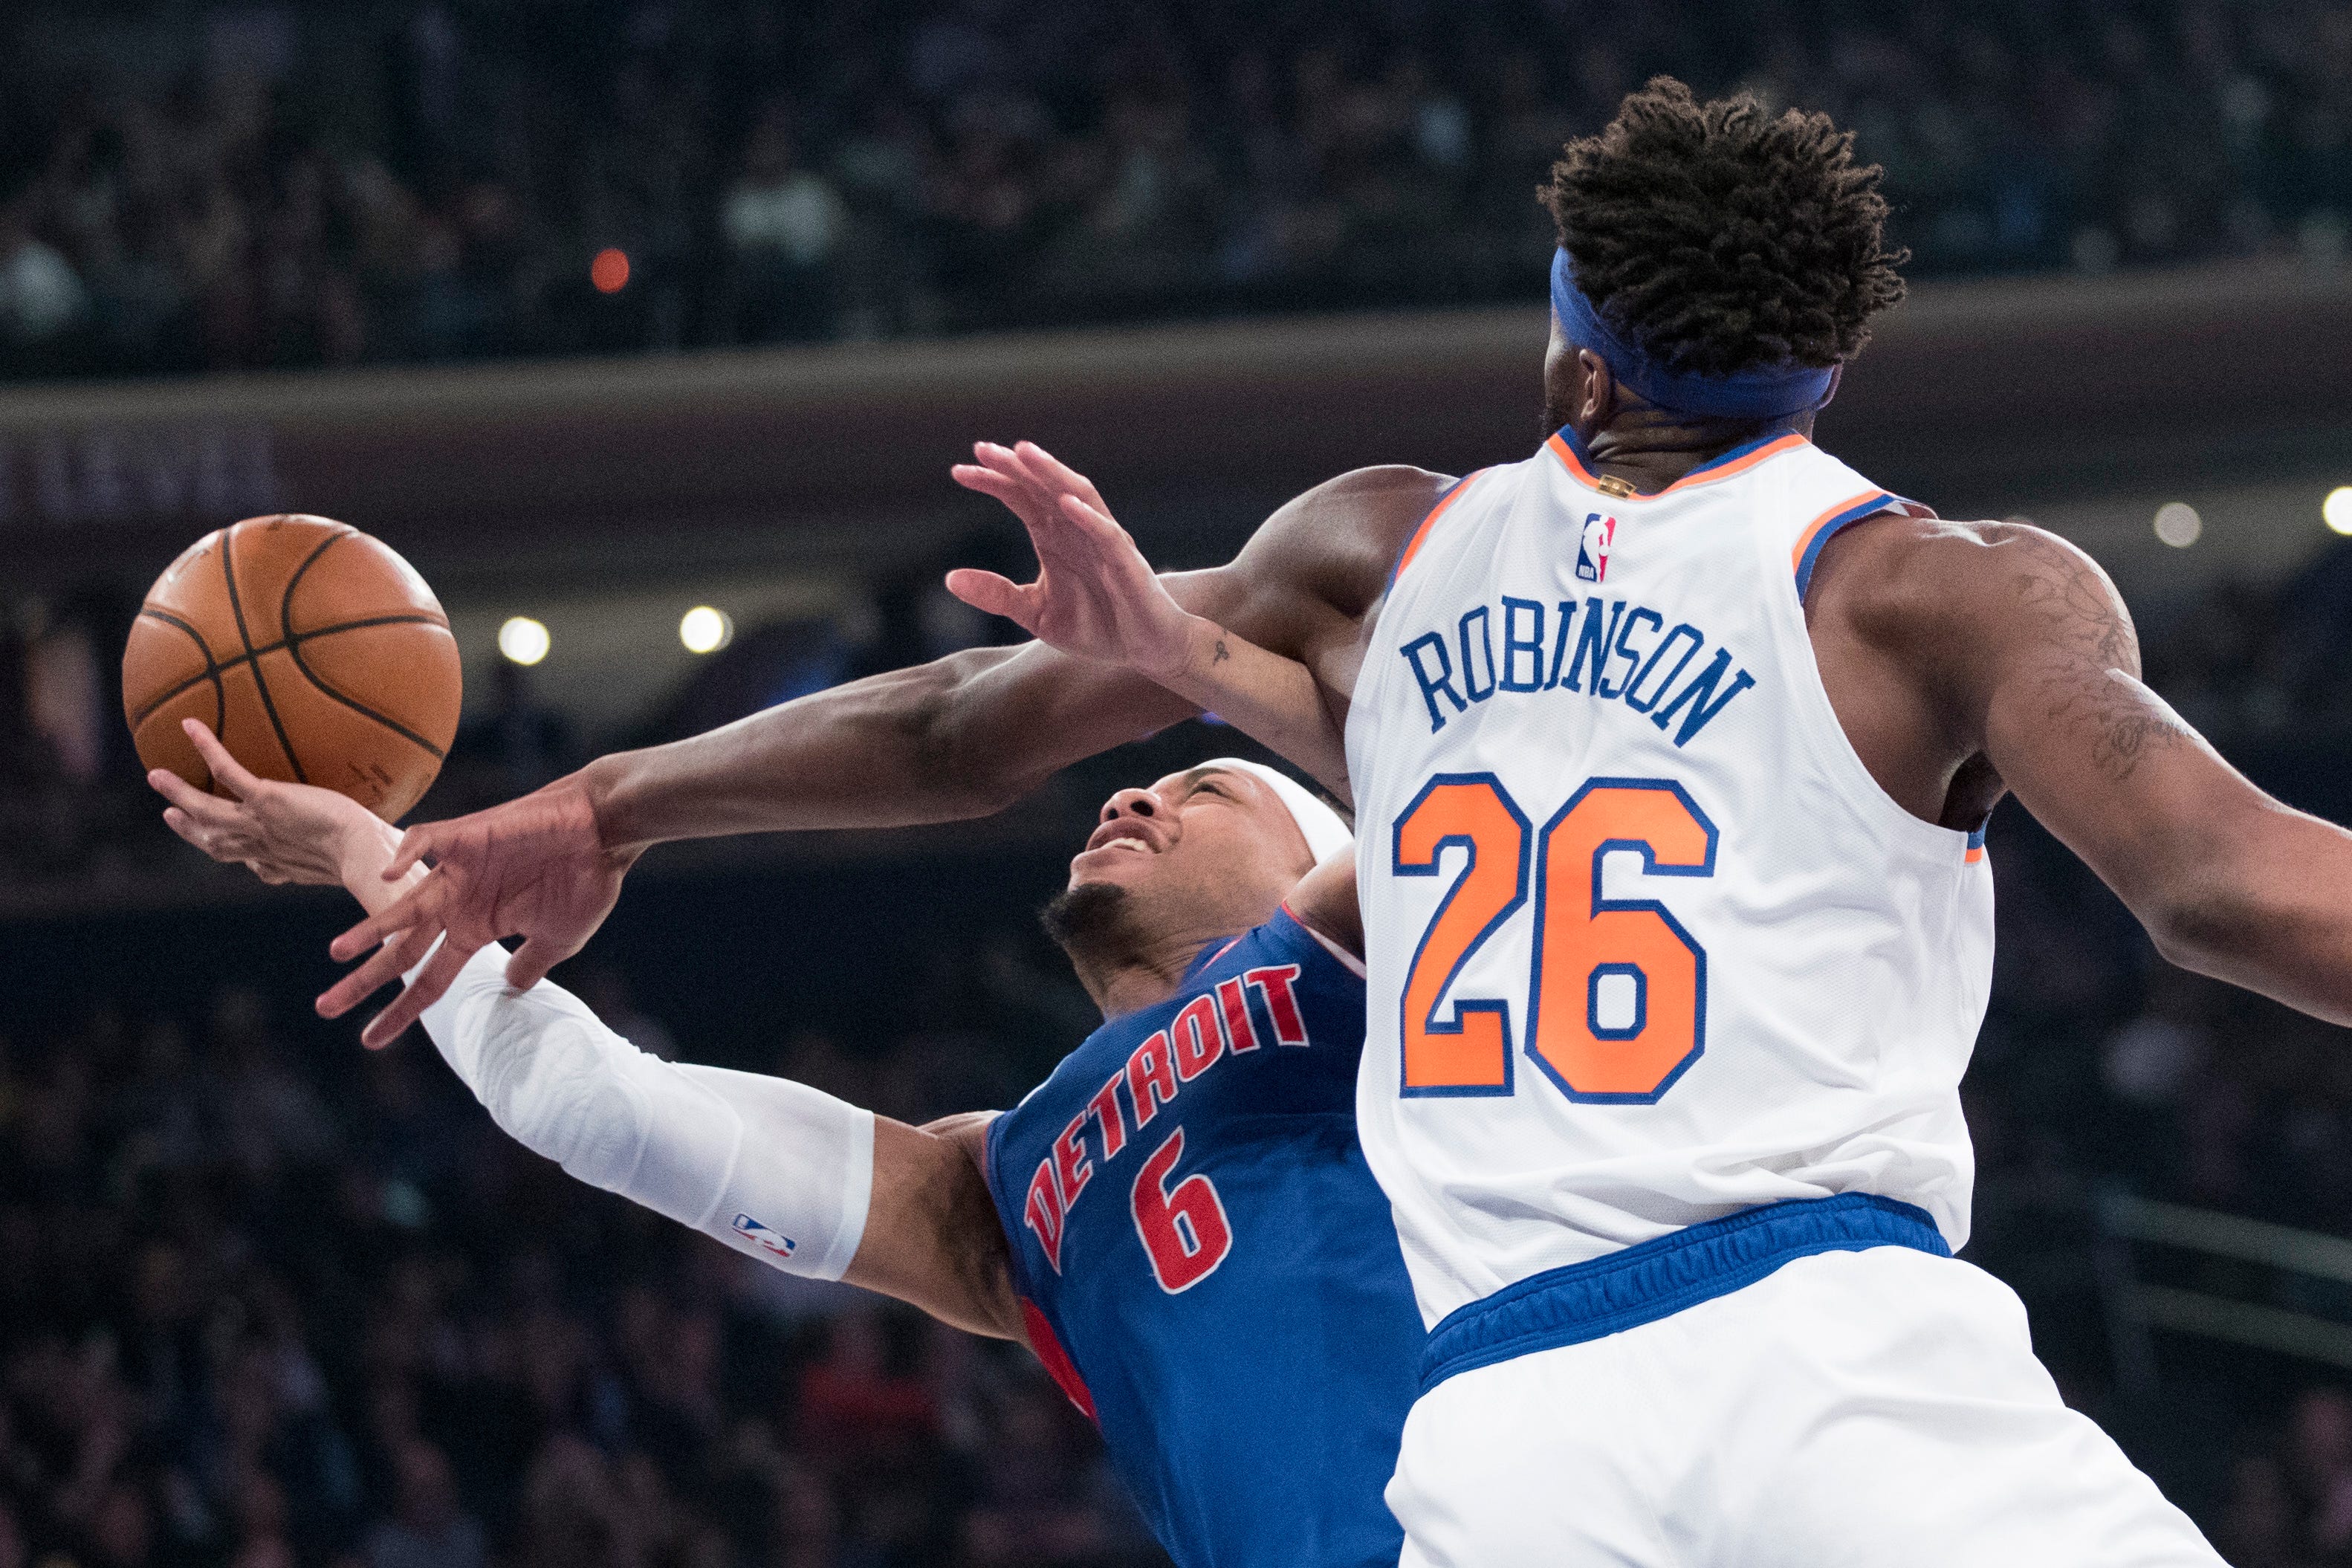 New York Knicks center Mitchell Robinson (26) fouls Detroit Pistons guard Bruce Brown (6) during the first half of their game Wednesday, April 10, 2019, at Madison Square Garden in New York. The Pistons win, 115-89.